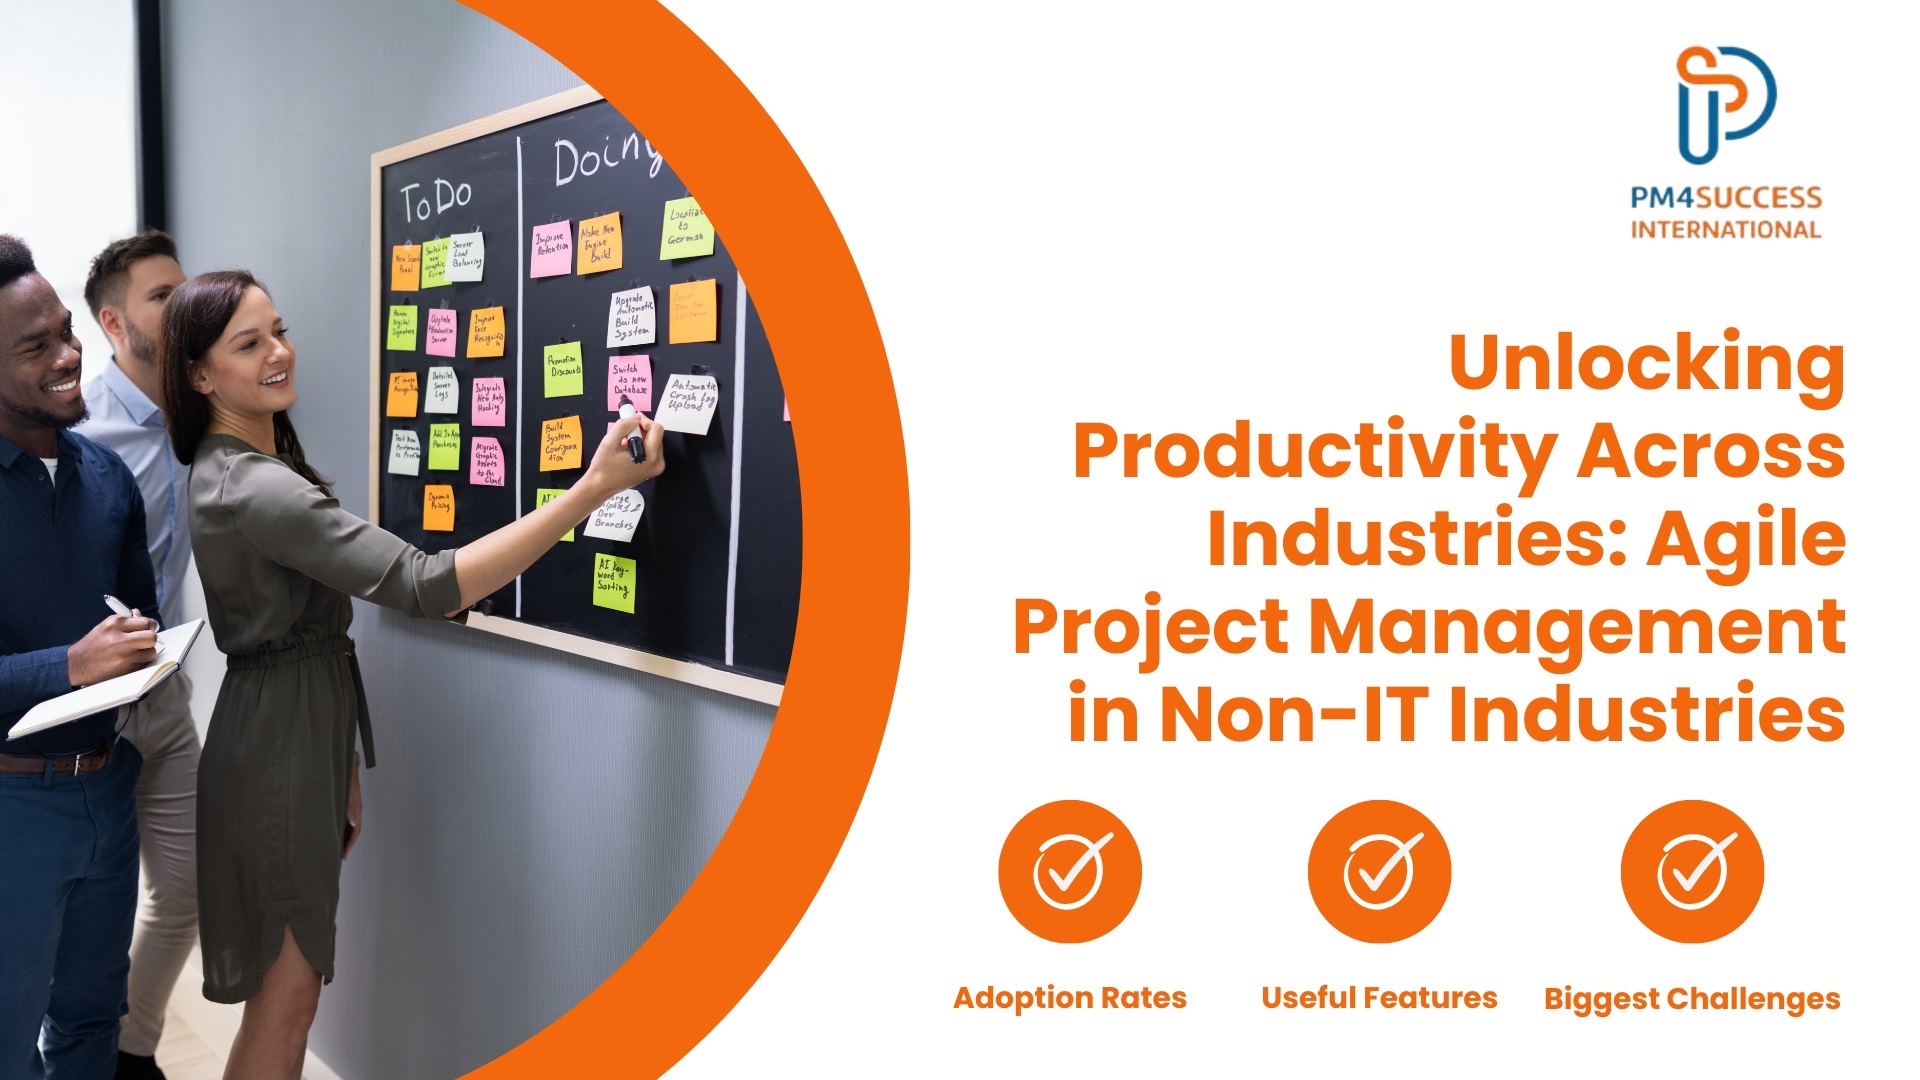 Unlocking Productivity Across Industries: Agile Project Management in Non-IT Industries.